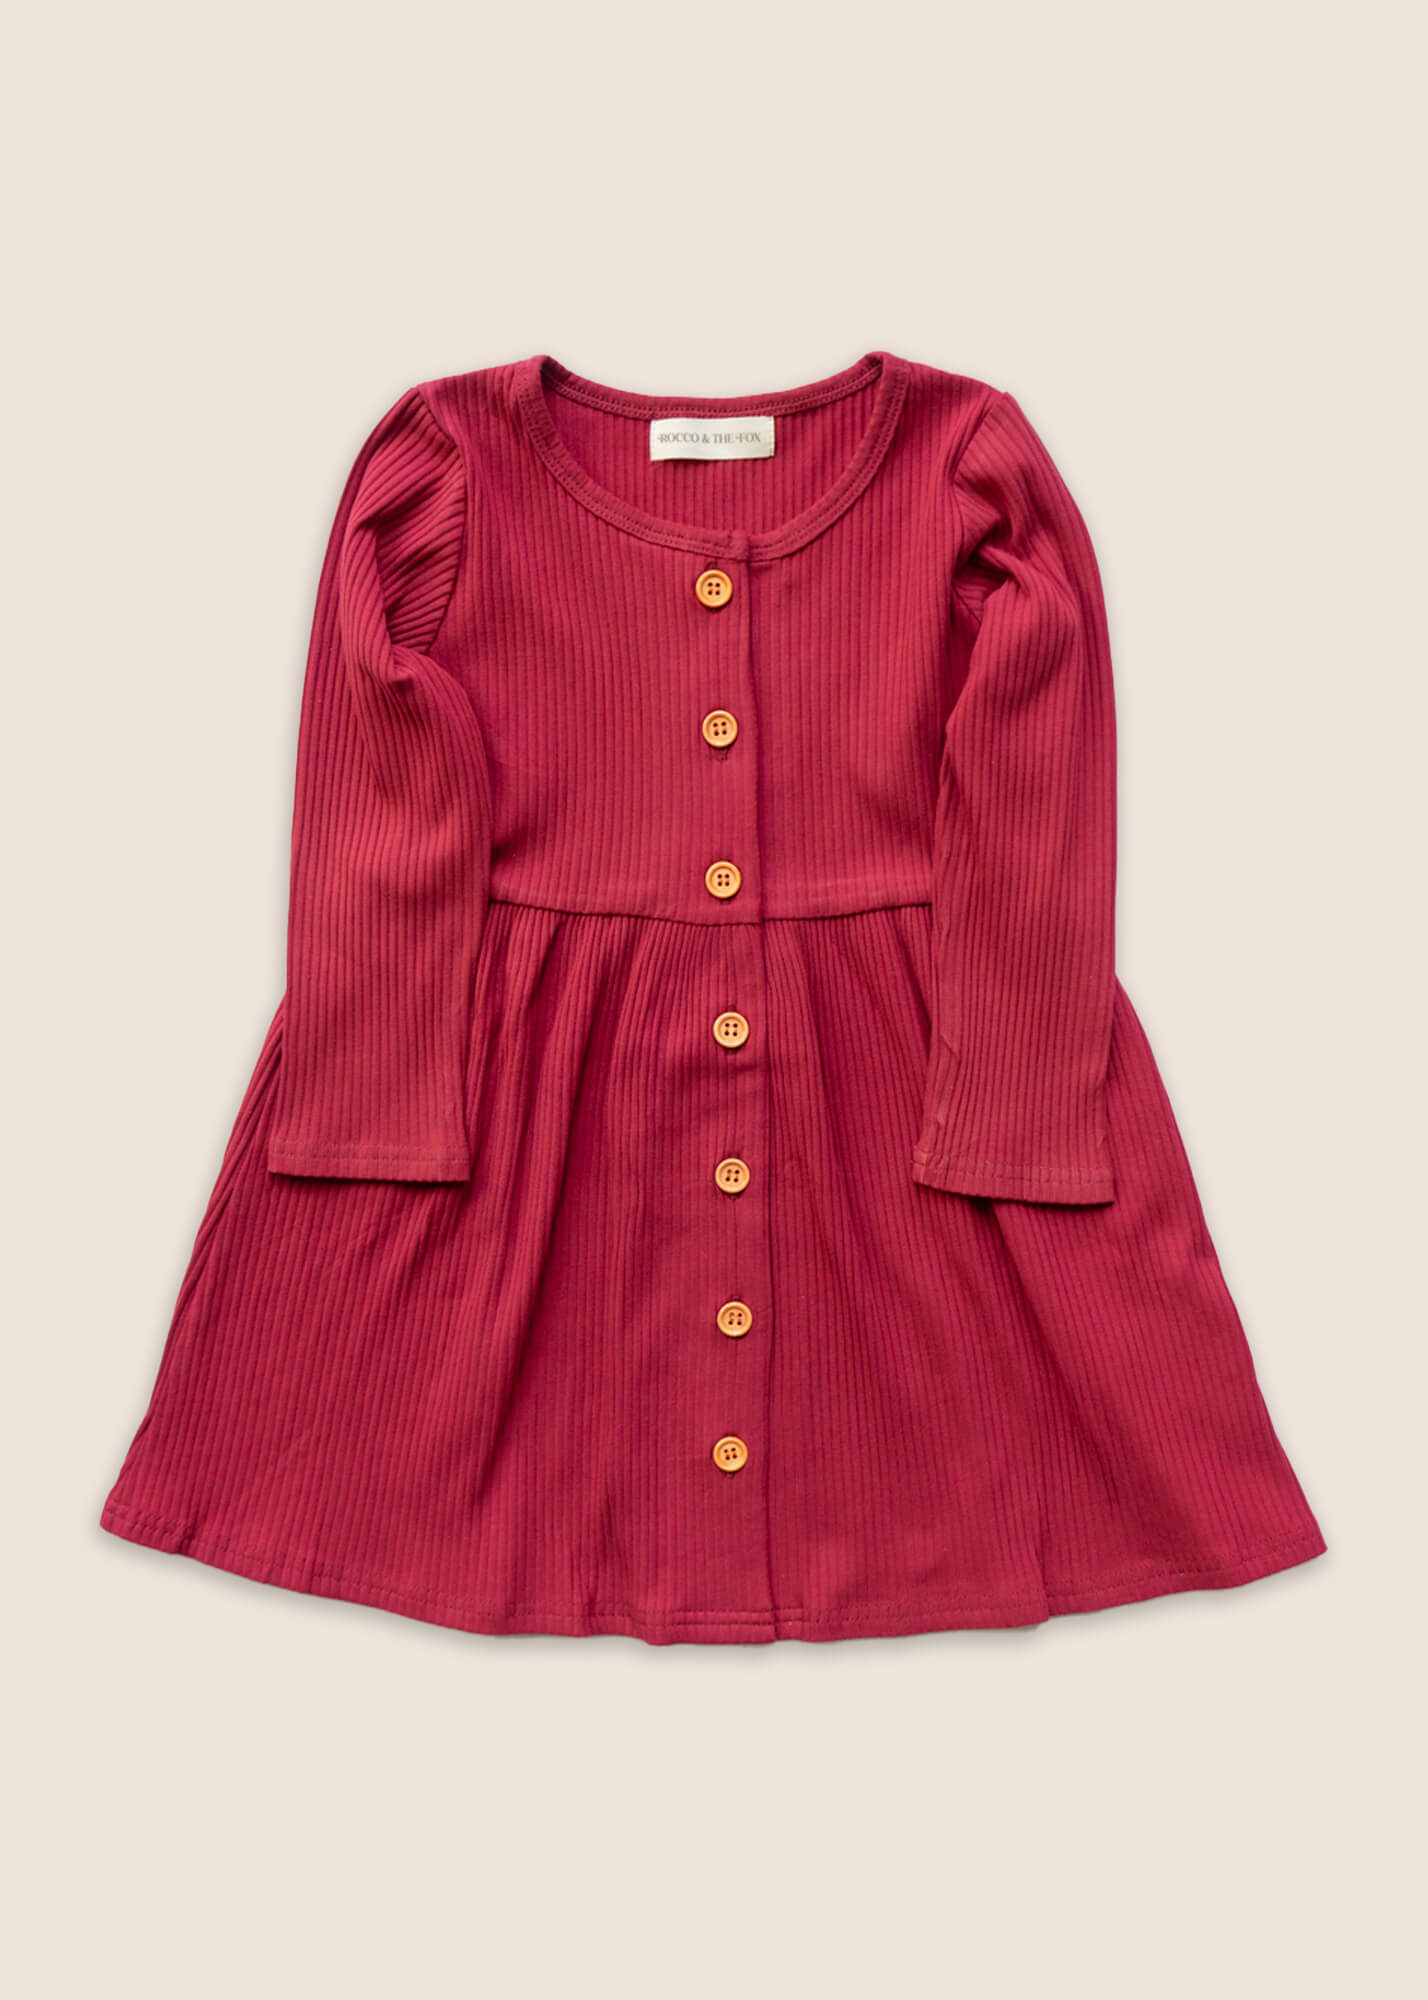 JOVIE Ribbed Button-Up Dress - Berry red girls dresses toddler christmas day outfit 2021 ribbed festive xmas day long winter dress